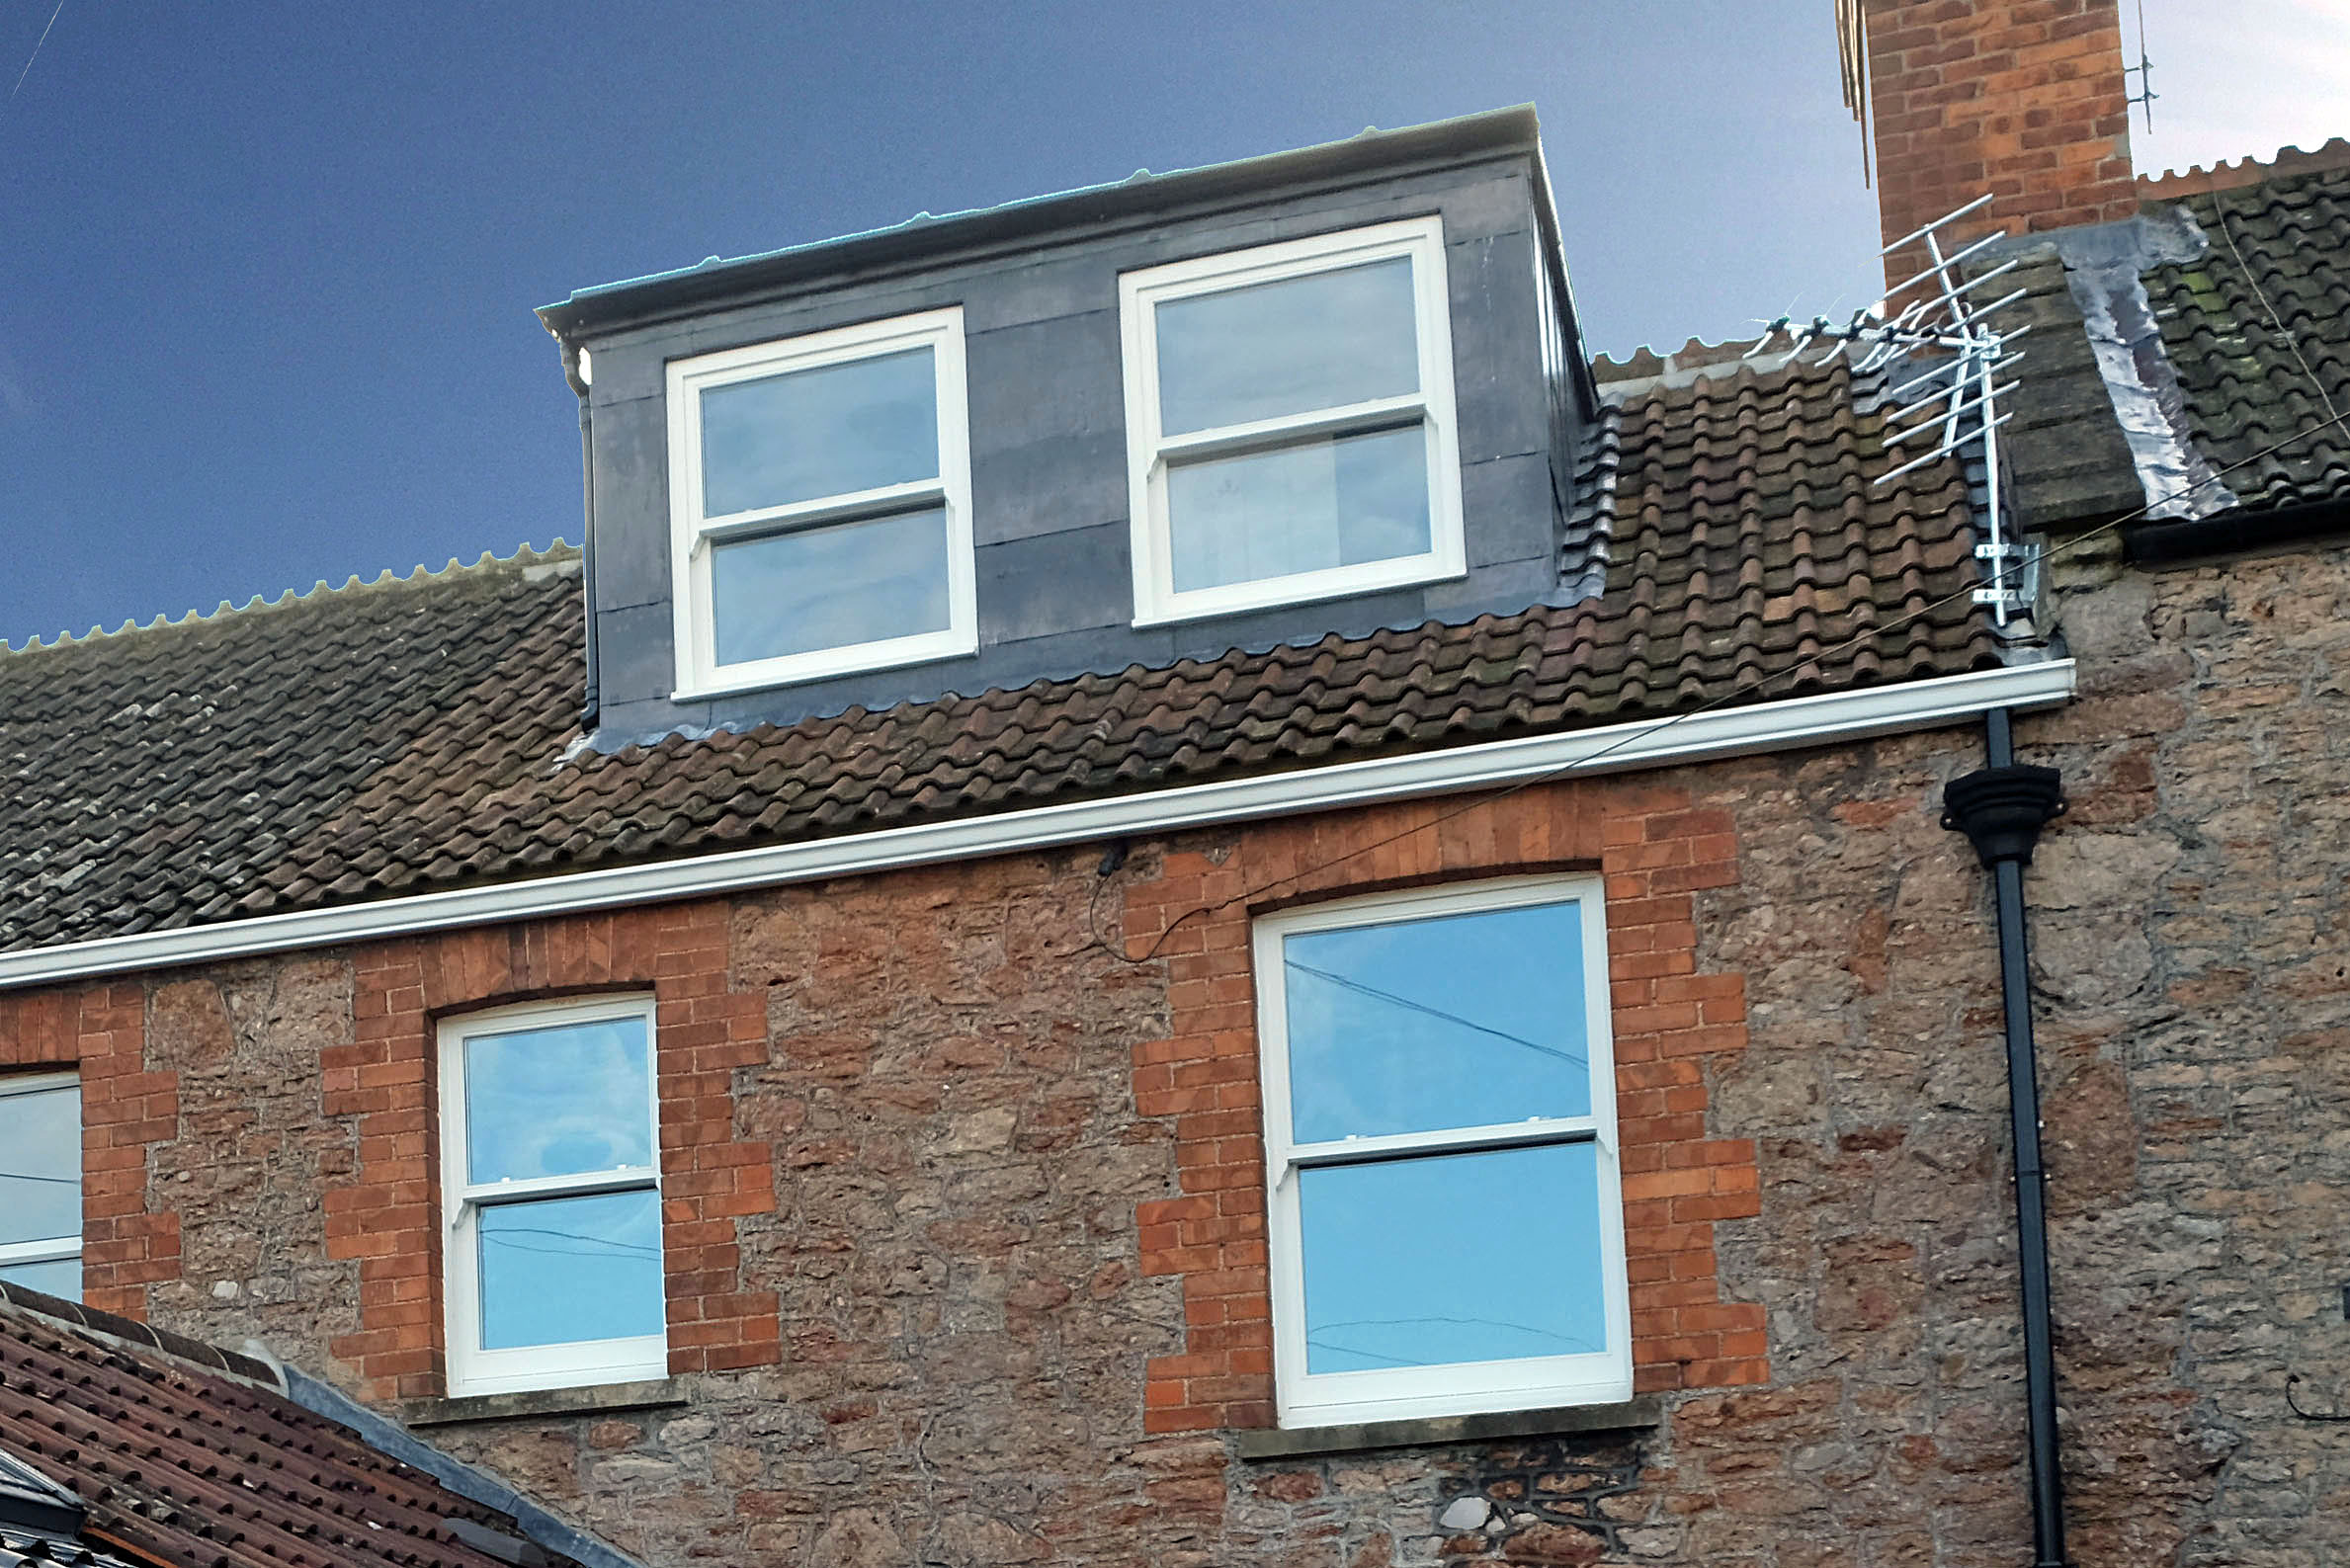 Loft Conversion to a Victorian Terraced Home